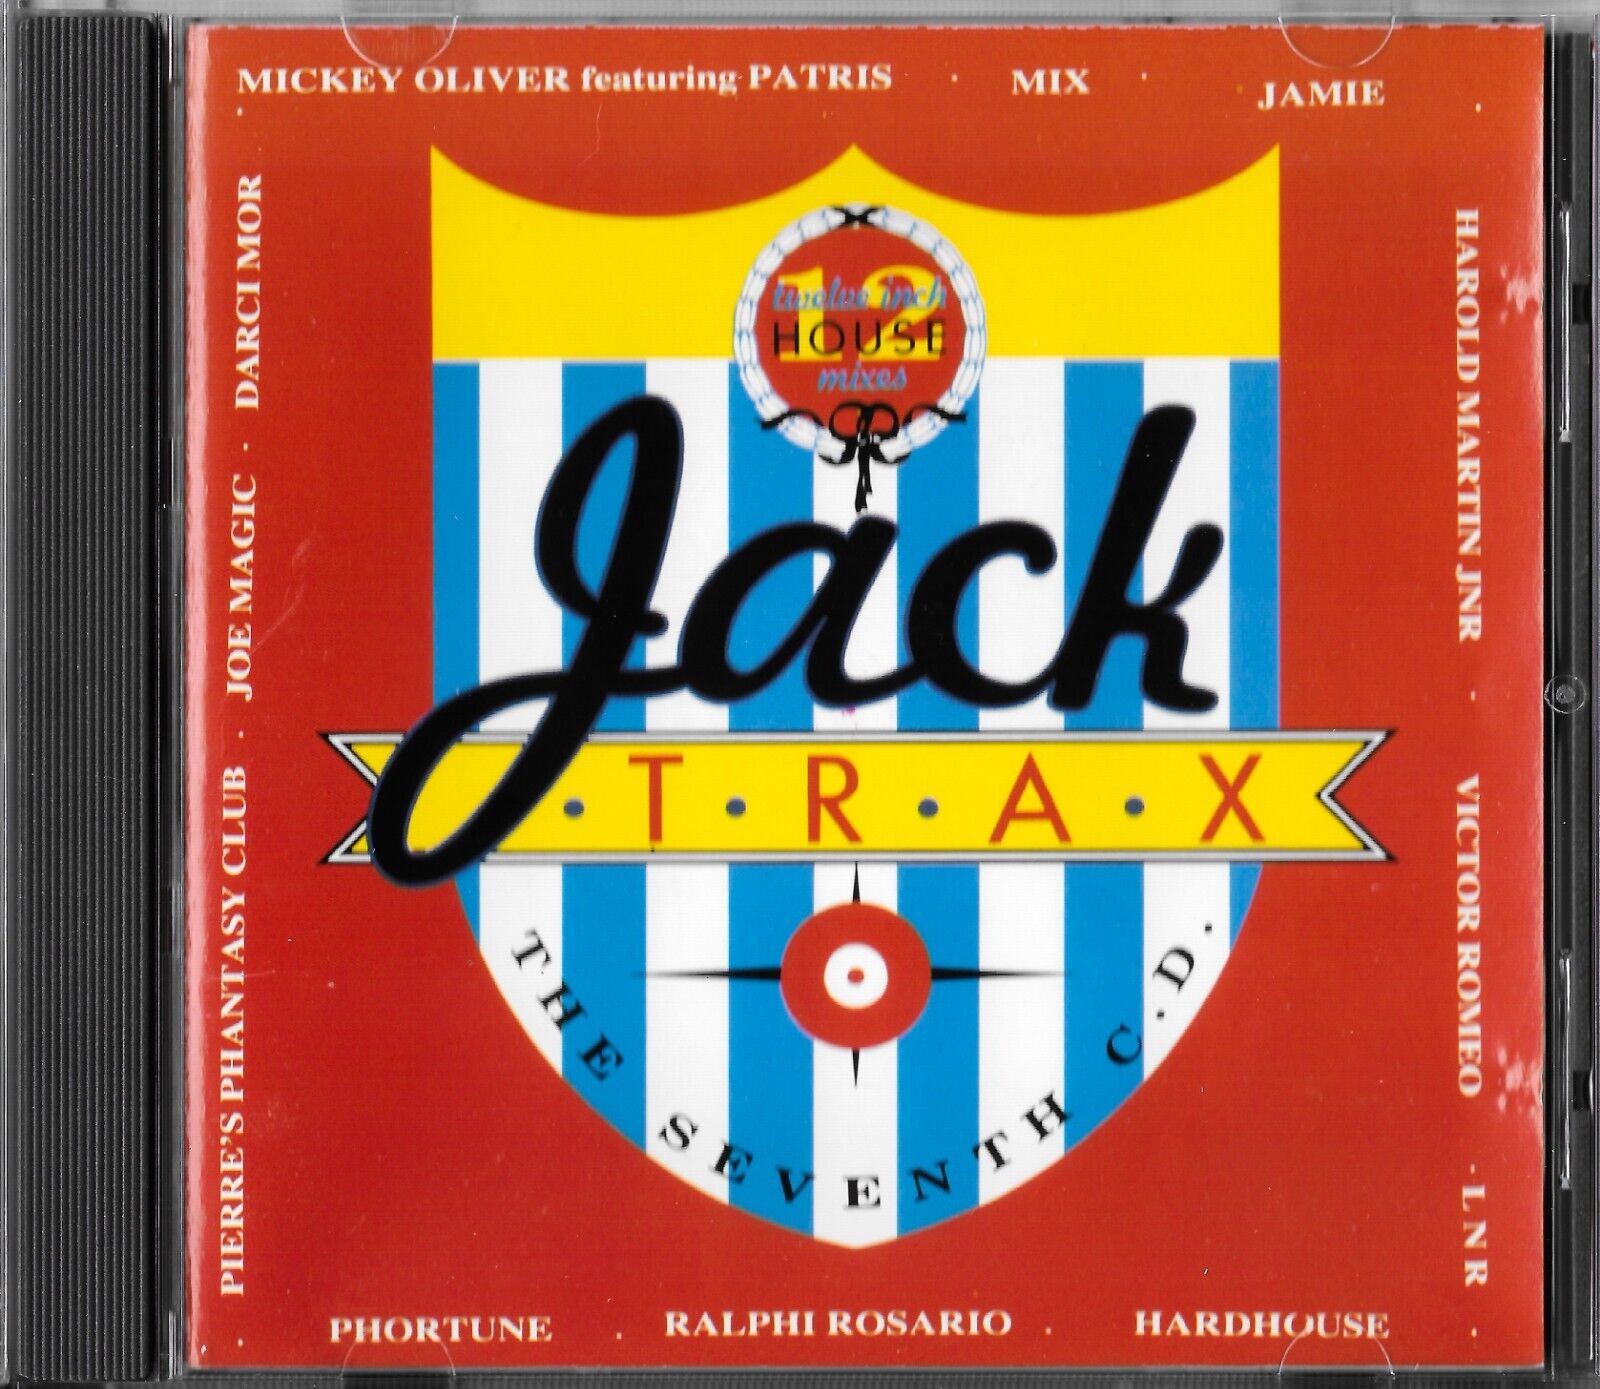 VARIOUS - Jack Trax: The Seventh CD (Import CD/1989 Jack Trax Records CD TRAX7)